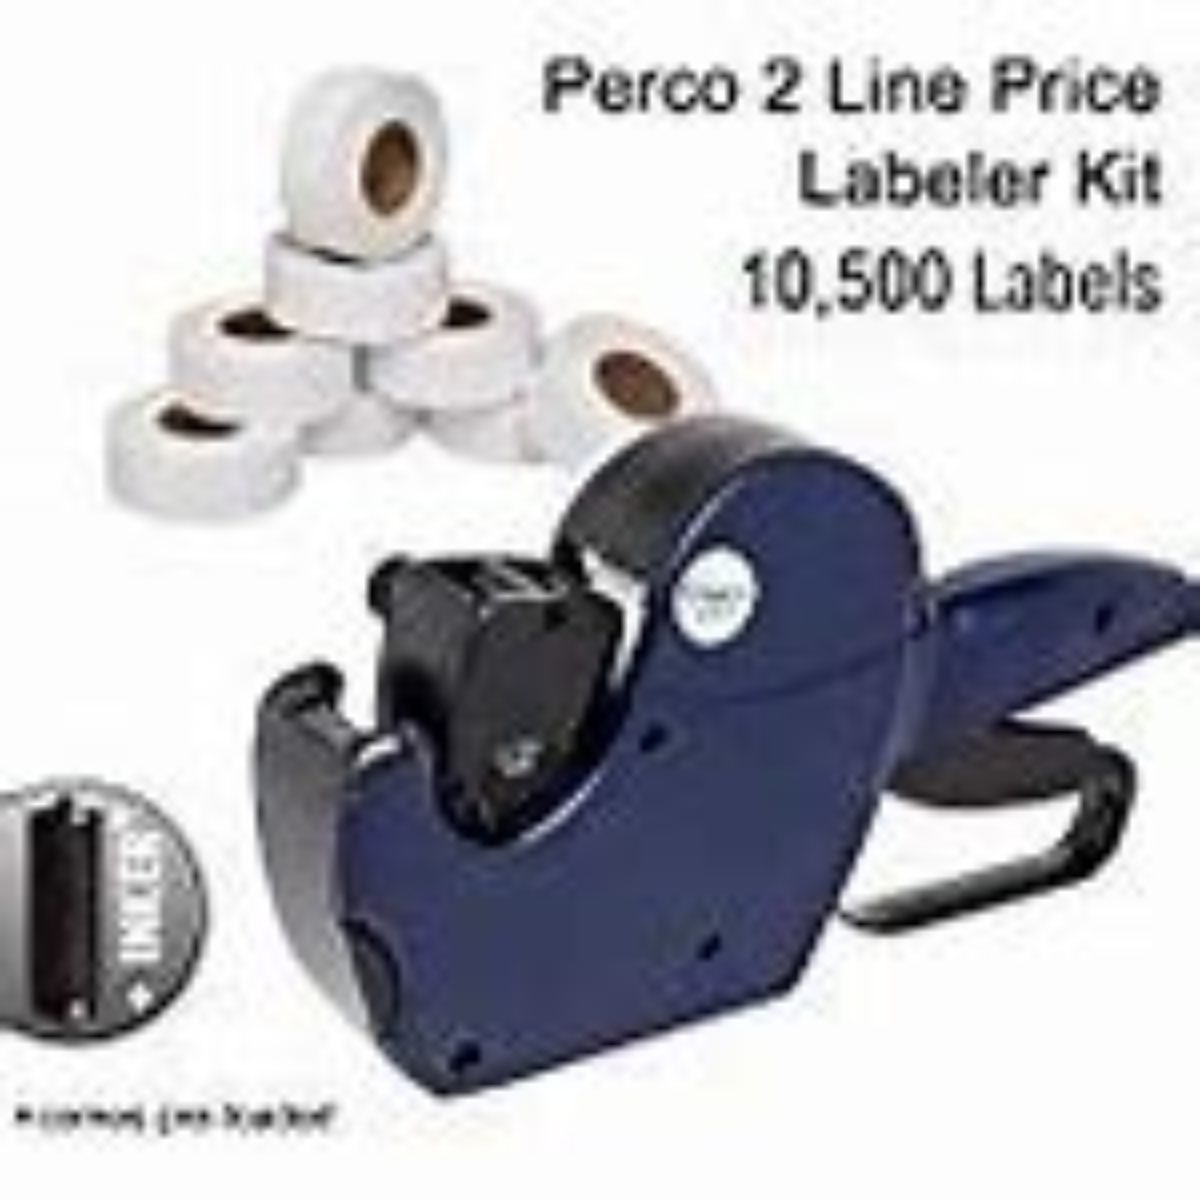 Bonus Ink Roll PercoSell by 1 Line Labels 10 Sleeve 80,000 Sell by Labels for Perco 1 Line Date Guns